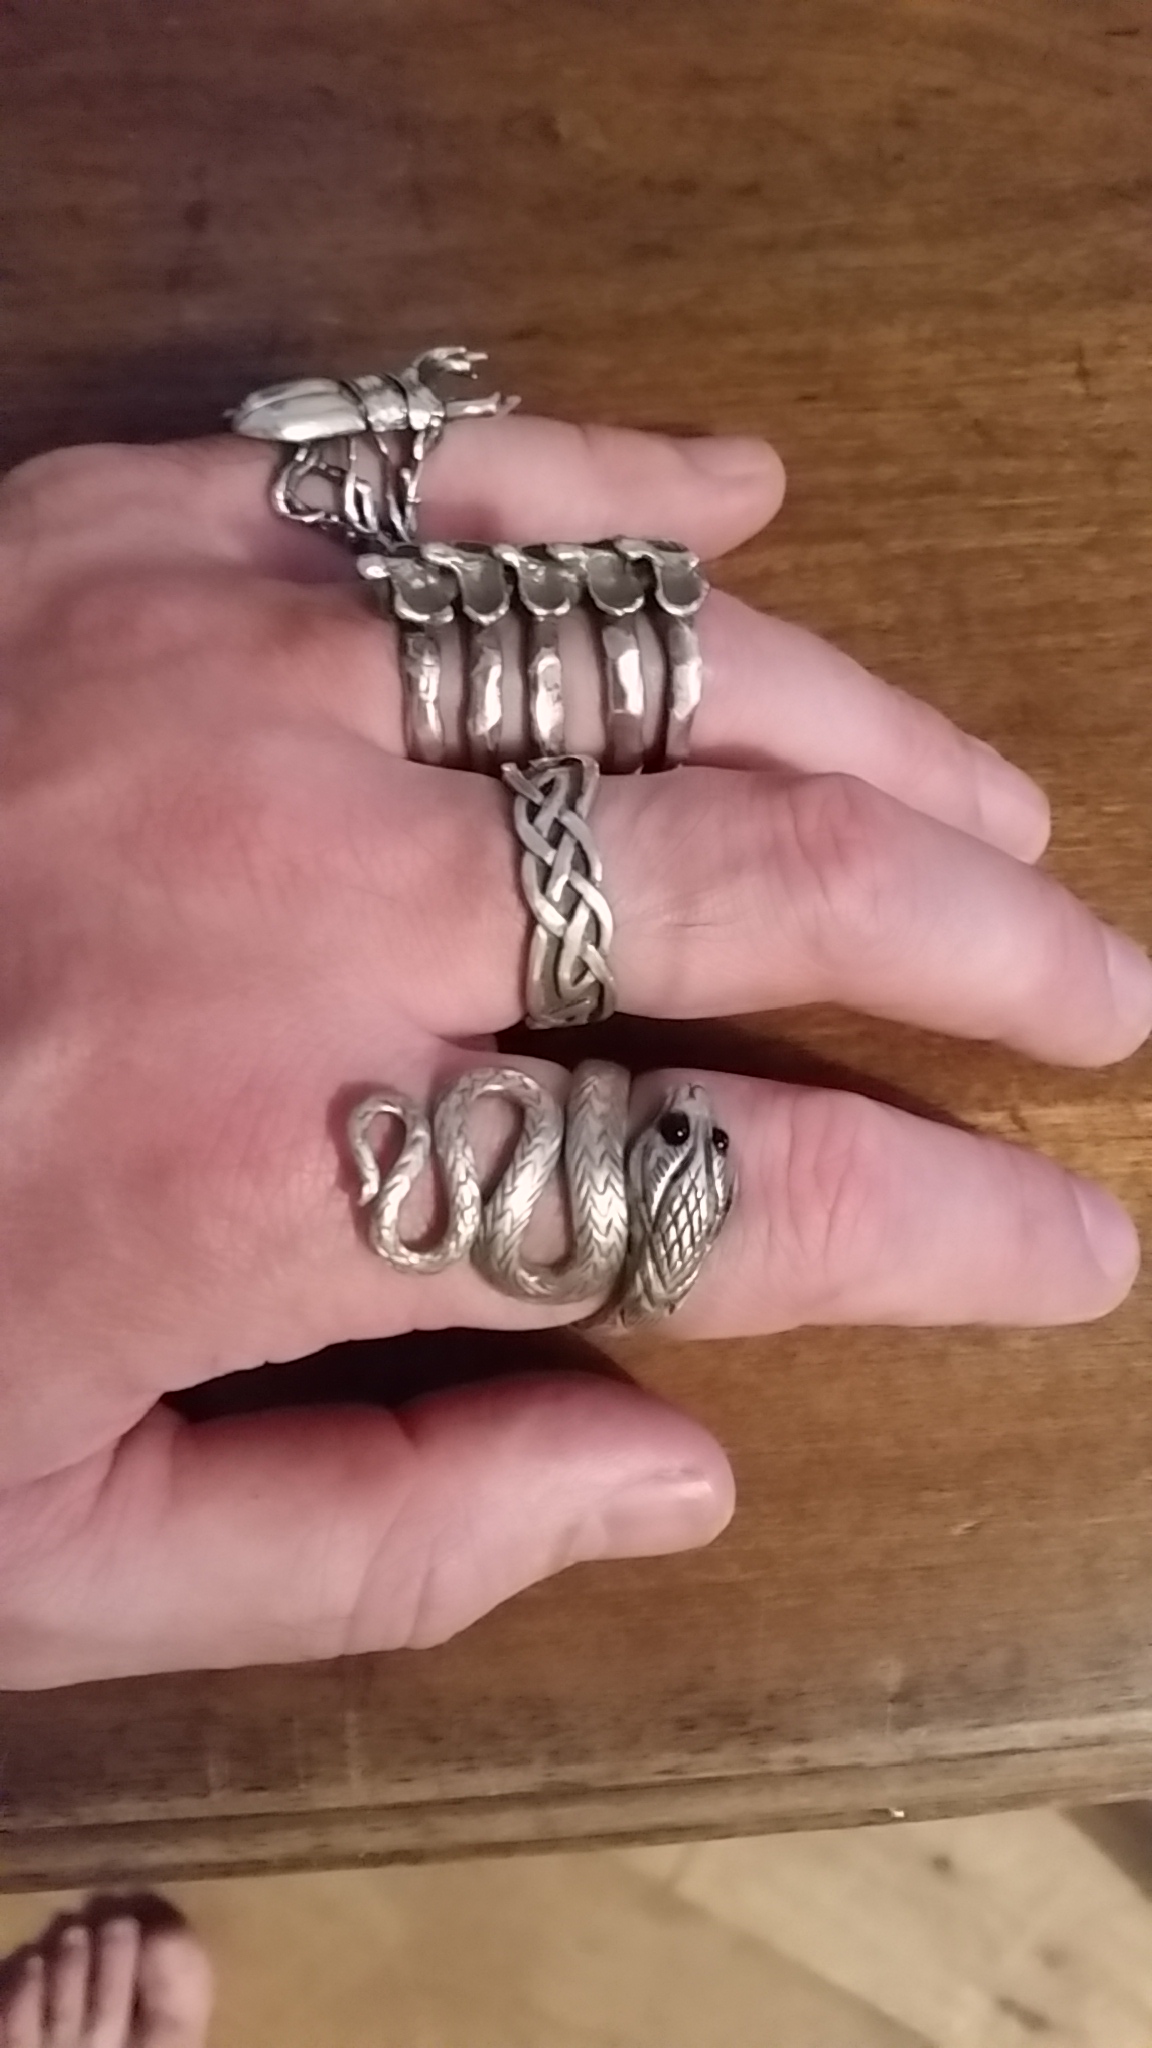 My ring collection is getting bigger